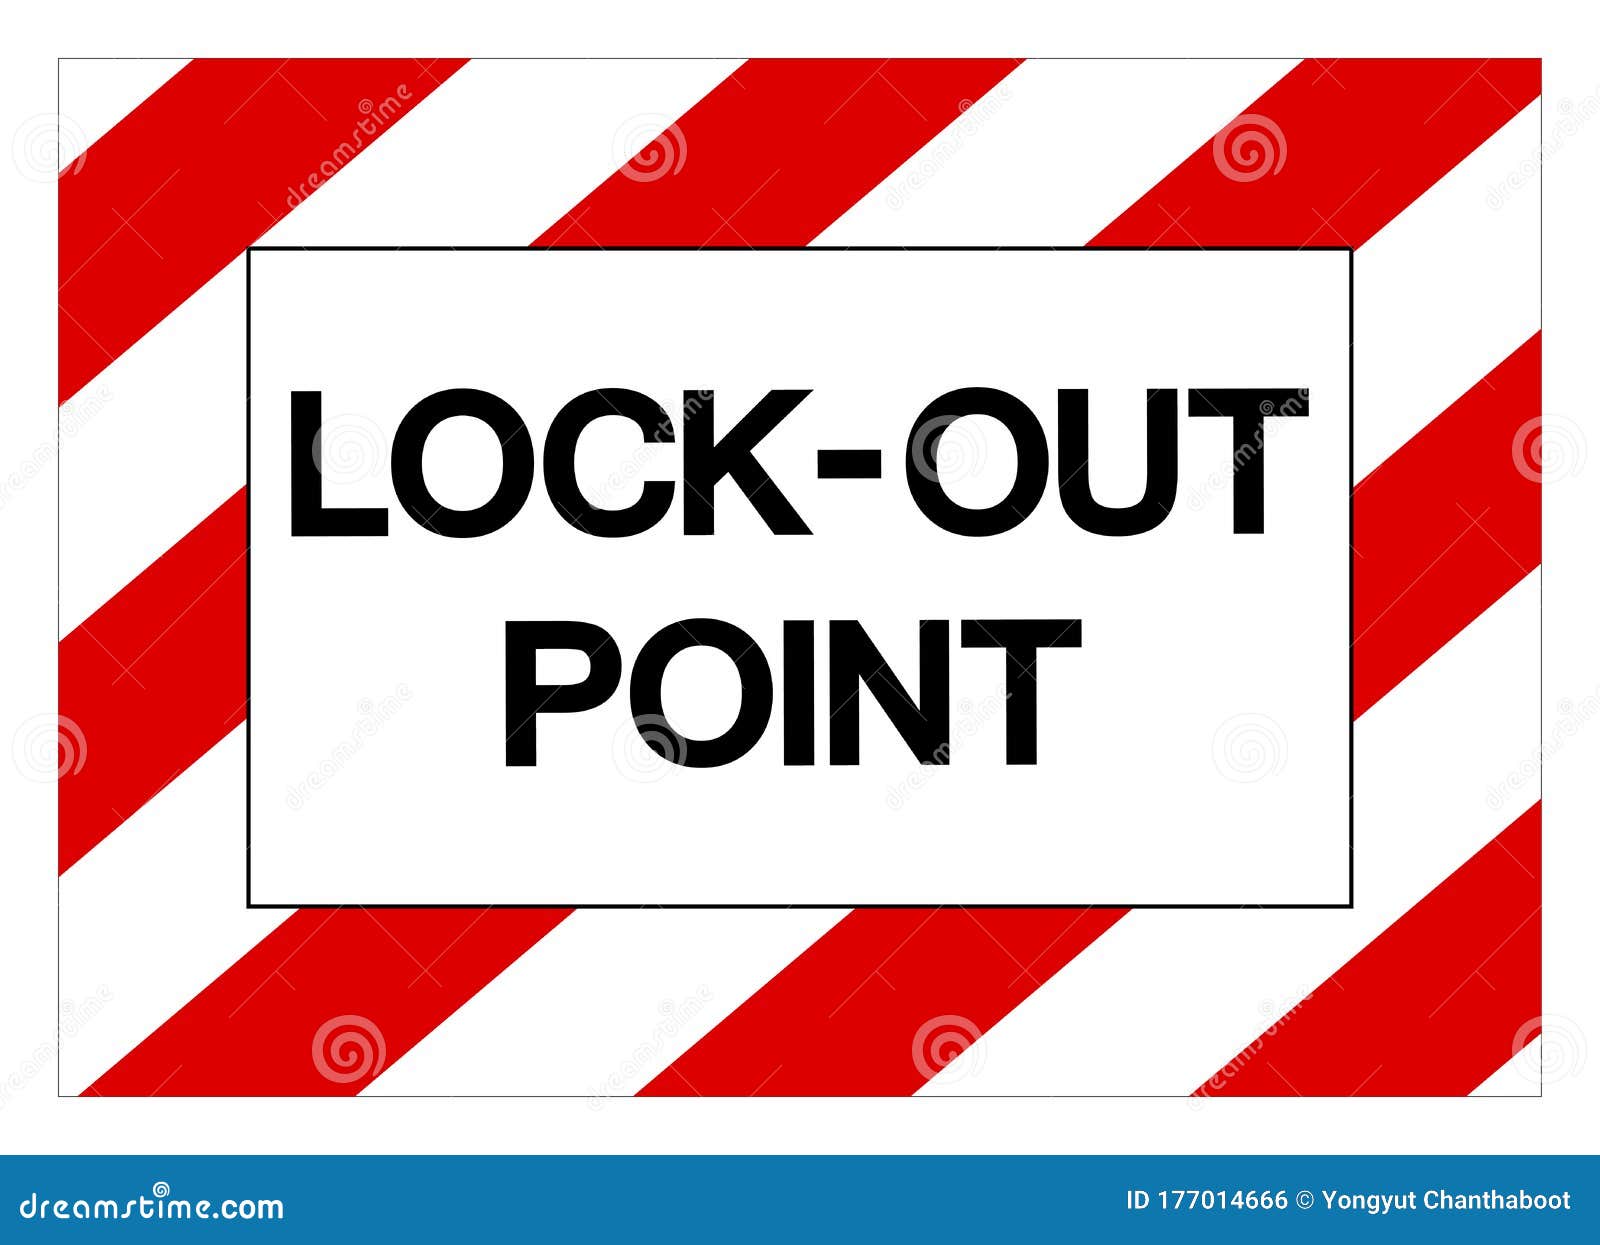 lock out point punto de bloqueo   sign,  , isolate on white background label .eps10